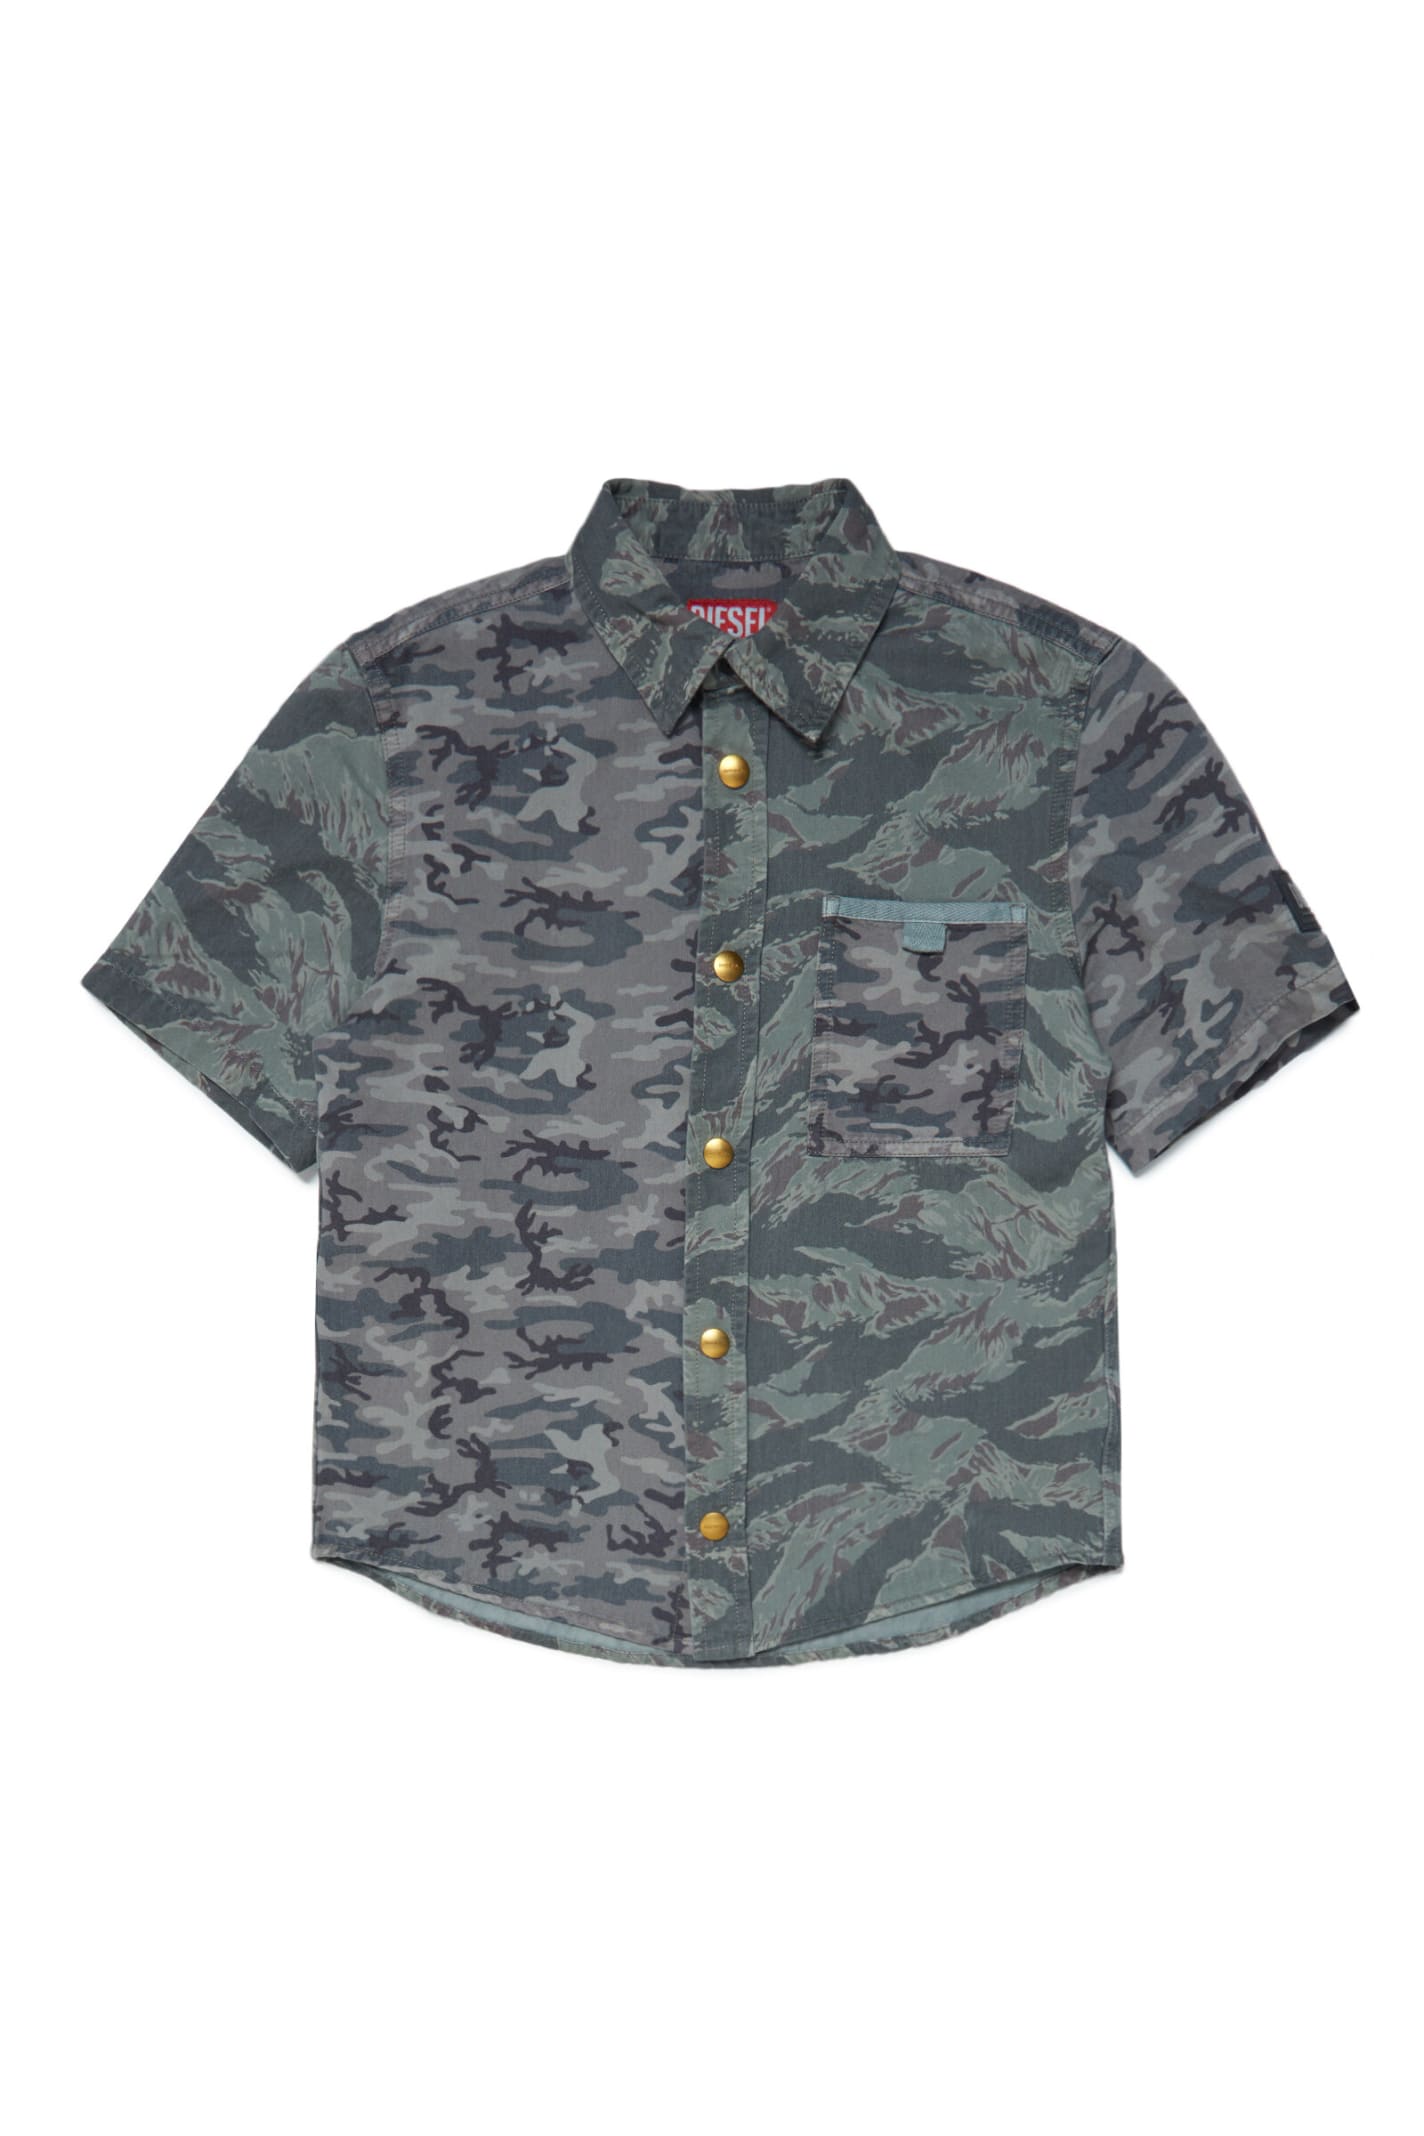 DIESEL CURM-CMF SHIRT DIESEL MILITARY GREEN CAMOUFLAGE MIX SHIRT WITH BREAST POCKET